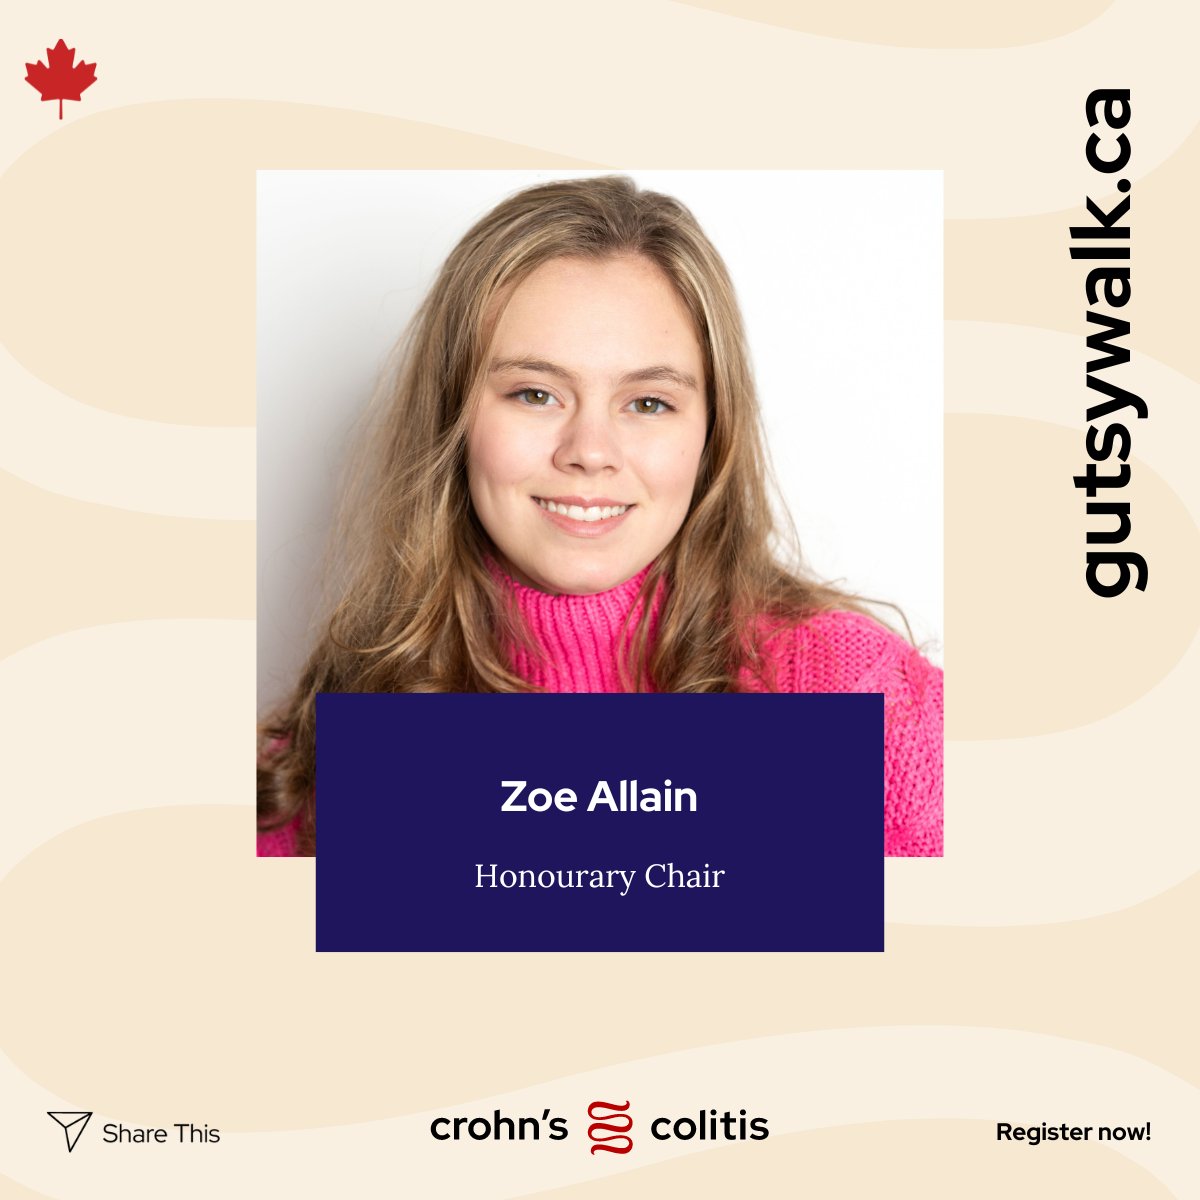 Zoe, one of this year’s Gutsy Walk Honourary Chairs, is passionate about advocating for all Canadians affected by Crohn’s and colitis, and ensuring they have improved access to washrooms. Read more about Zoe and join her at this year’s #gutsywalk: bit.ly/Honourarychairs